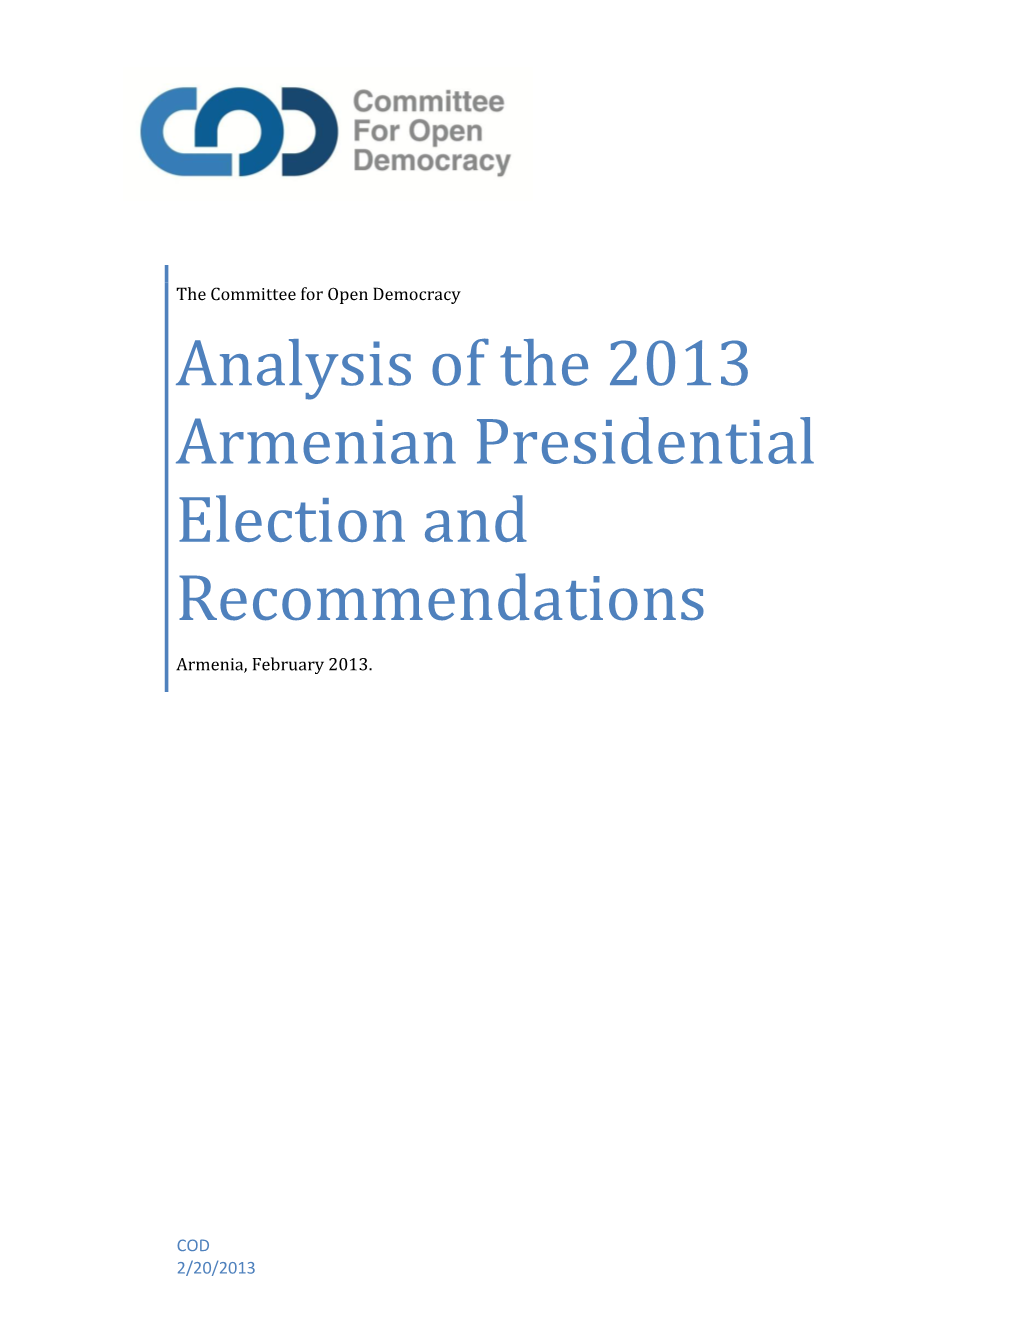 Analysis of the 2013 Armenian Presidential Election and Recommendations